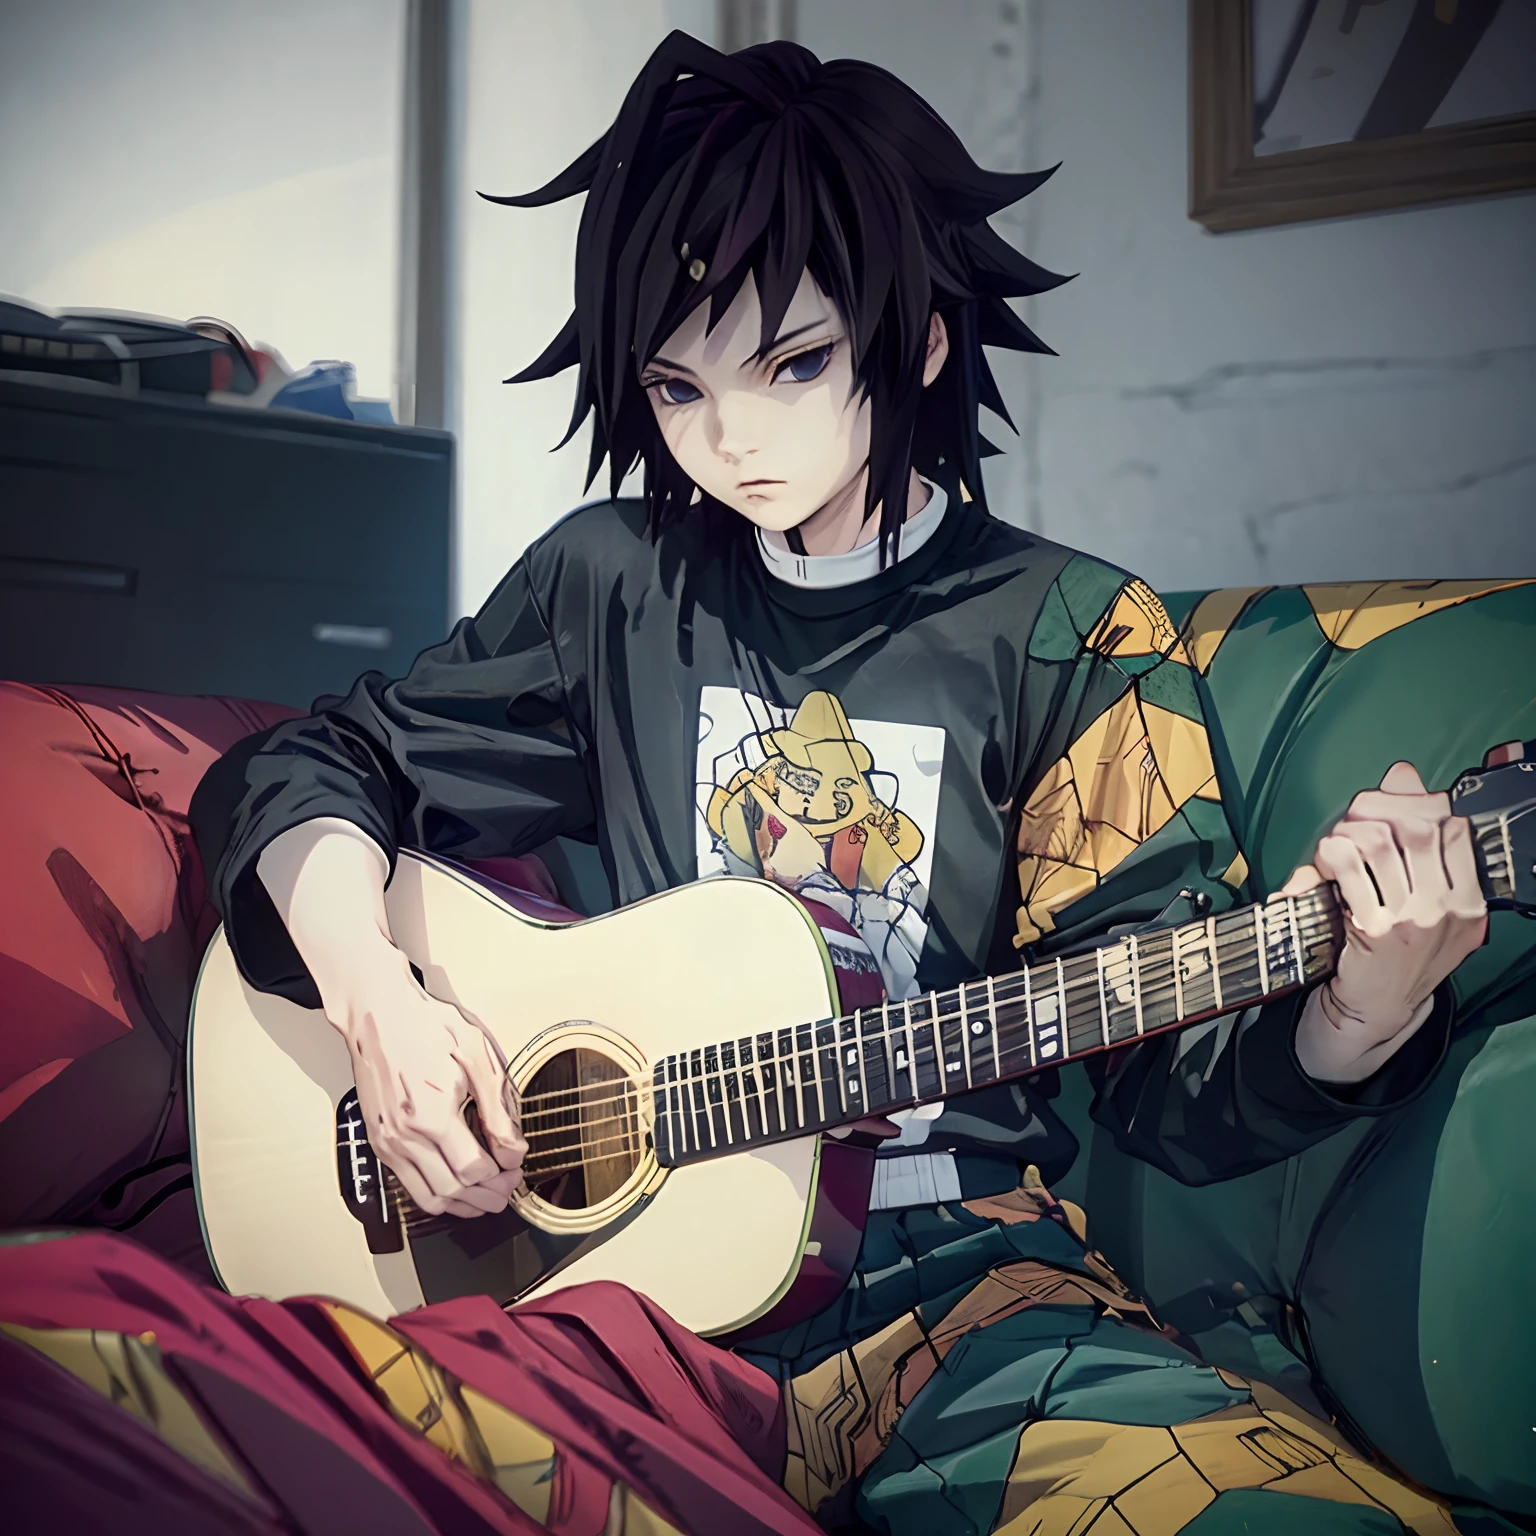 Boy1, Plays the guitar, frontal view, Straight angle width, T-shirt with long sleeves, bloomers, Sitting on a sofa, At home, looking at the scenes., detailed face, Realistic features, detailled eyes, high-definition